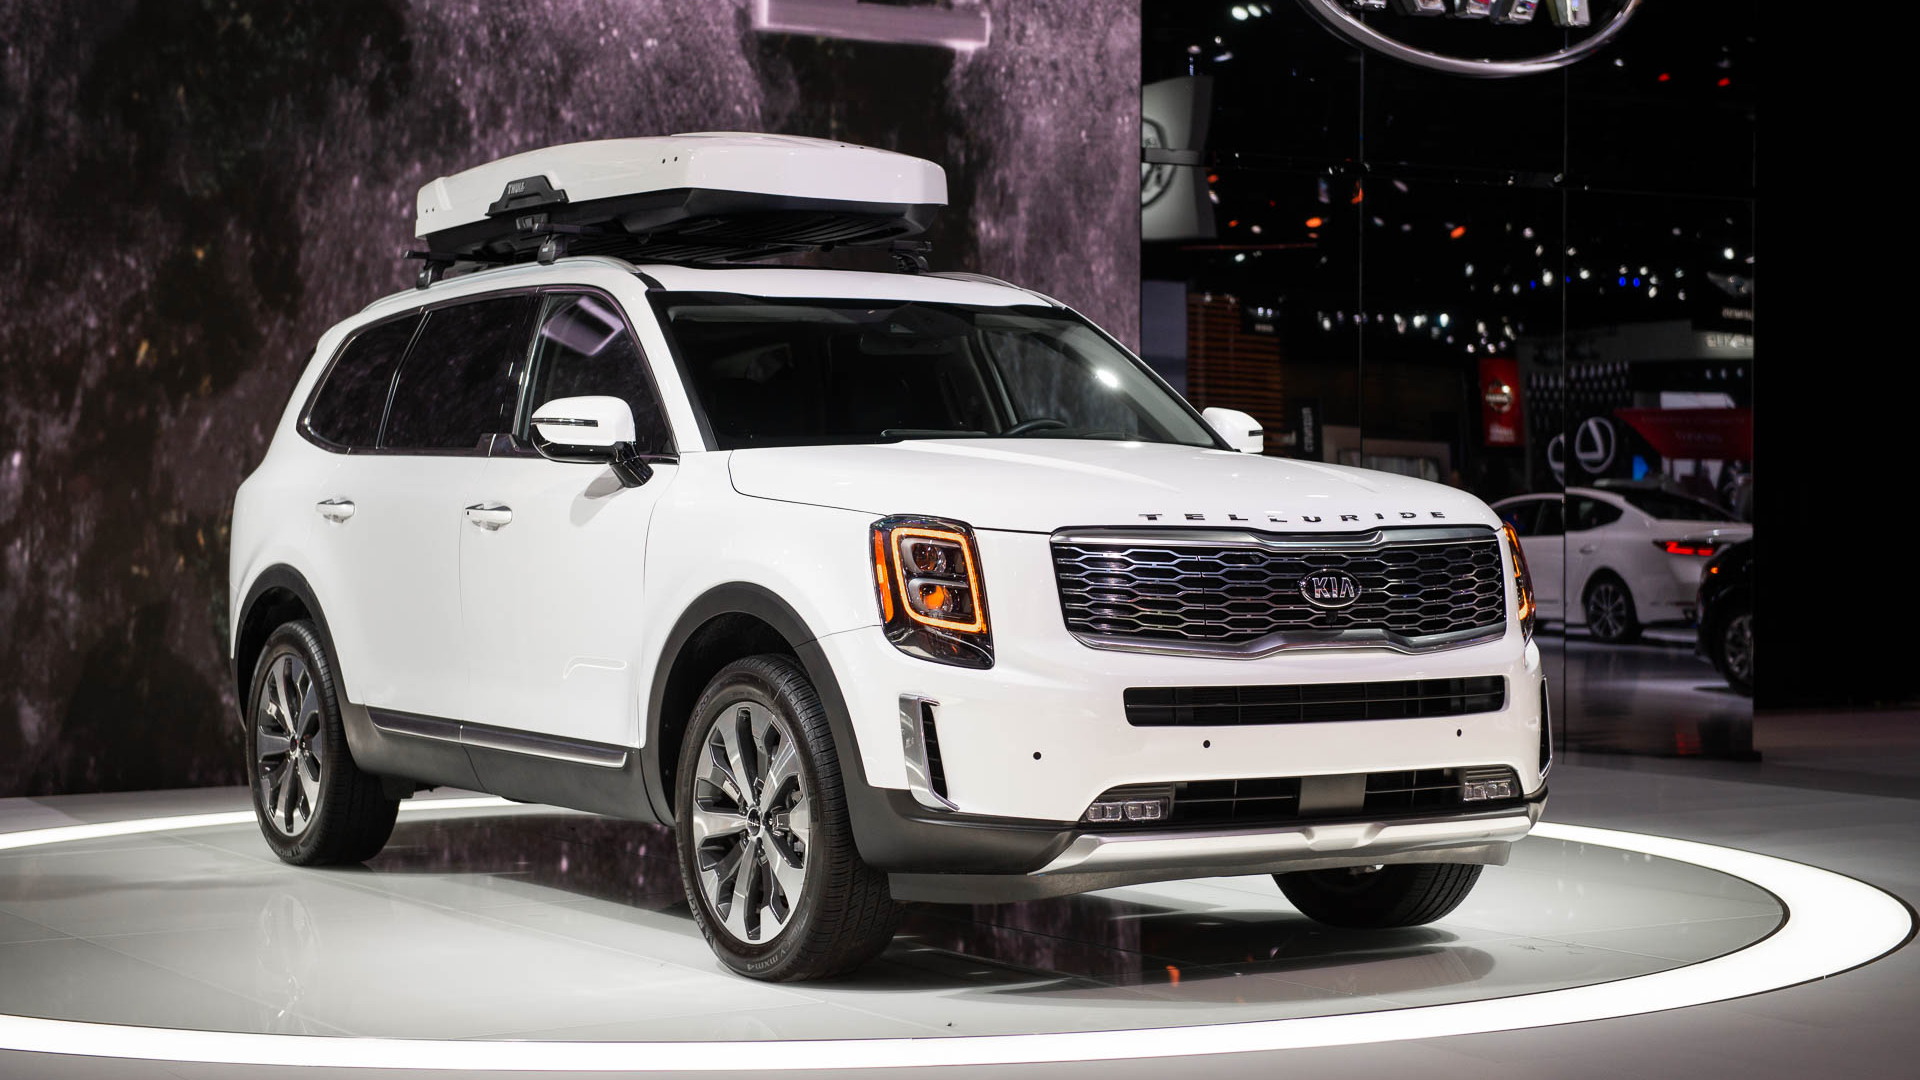 2020 Kia Telluride is a new option for the big SUV crowd